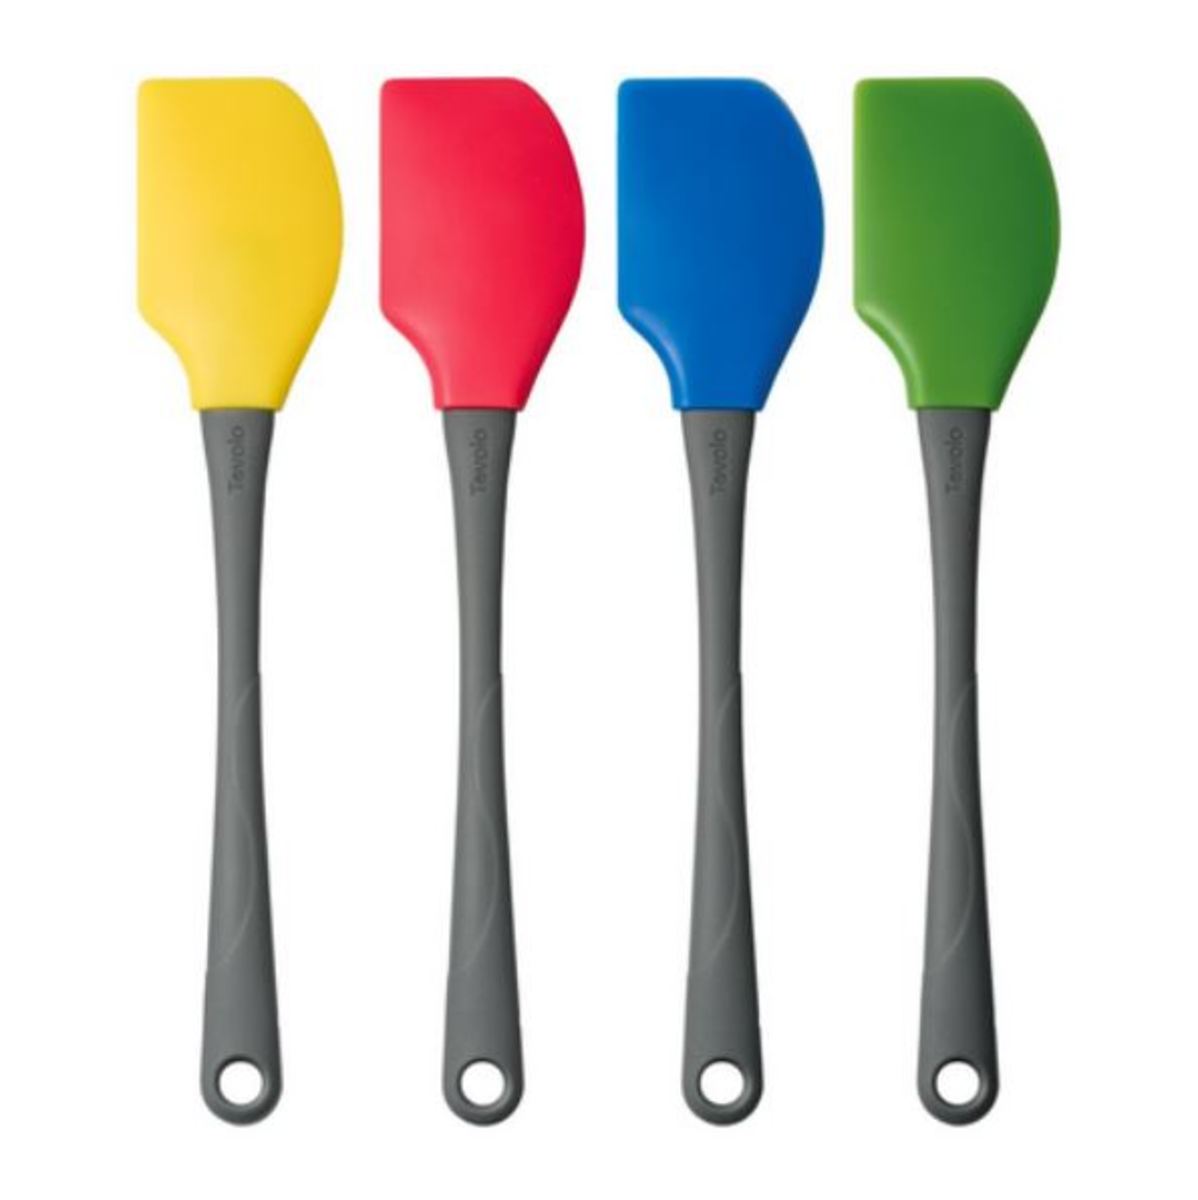 https://images.saymedia-content.com/.image/t_share/MTc2NDYzODcyNDMyMTUzODEz/best-all-purpose-silicone-spatula-for-baking-high-heat-review-tovolo.jpg